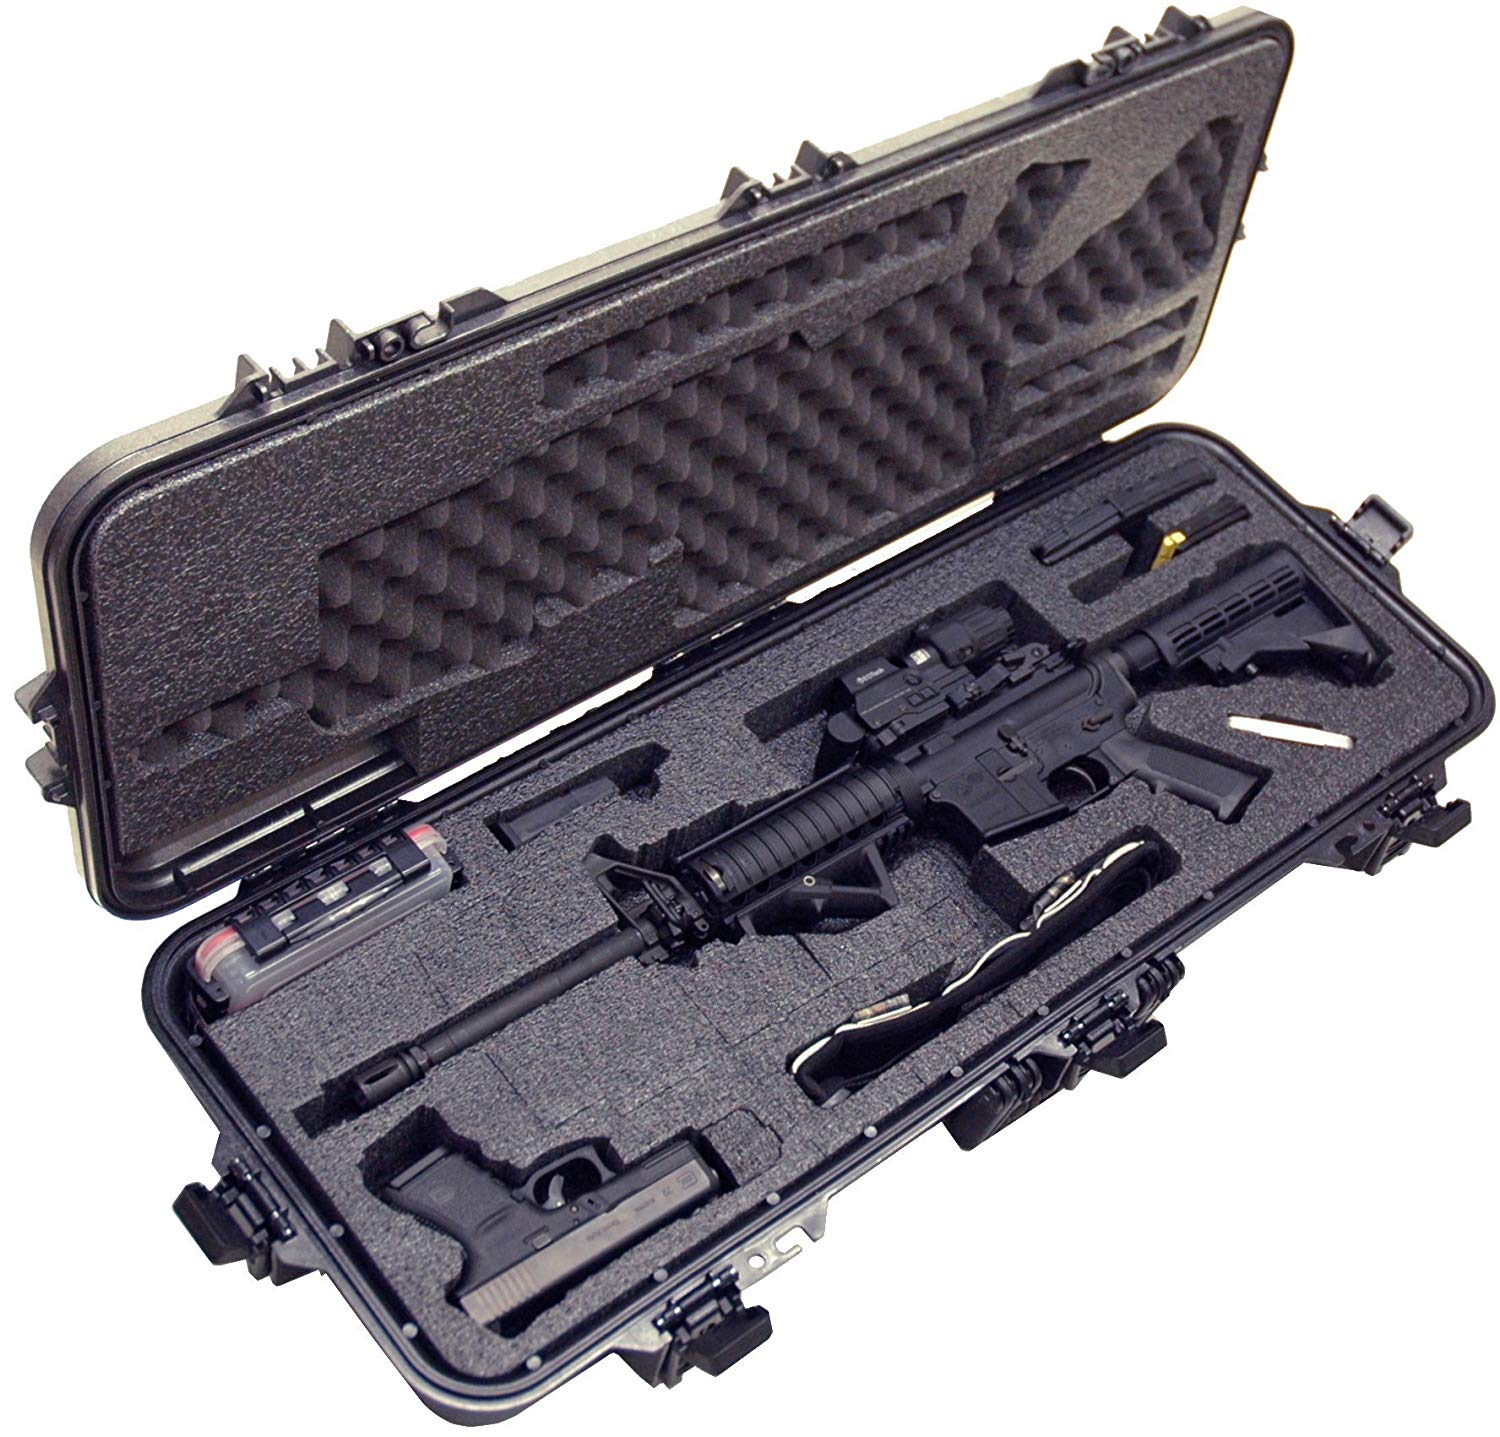 Reviewing The Top 3 Selling Soft Cases For AR-15 Rifle